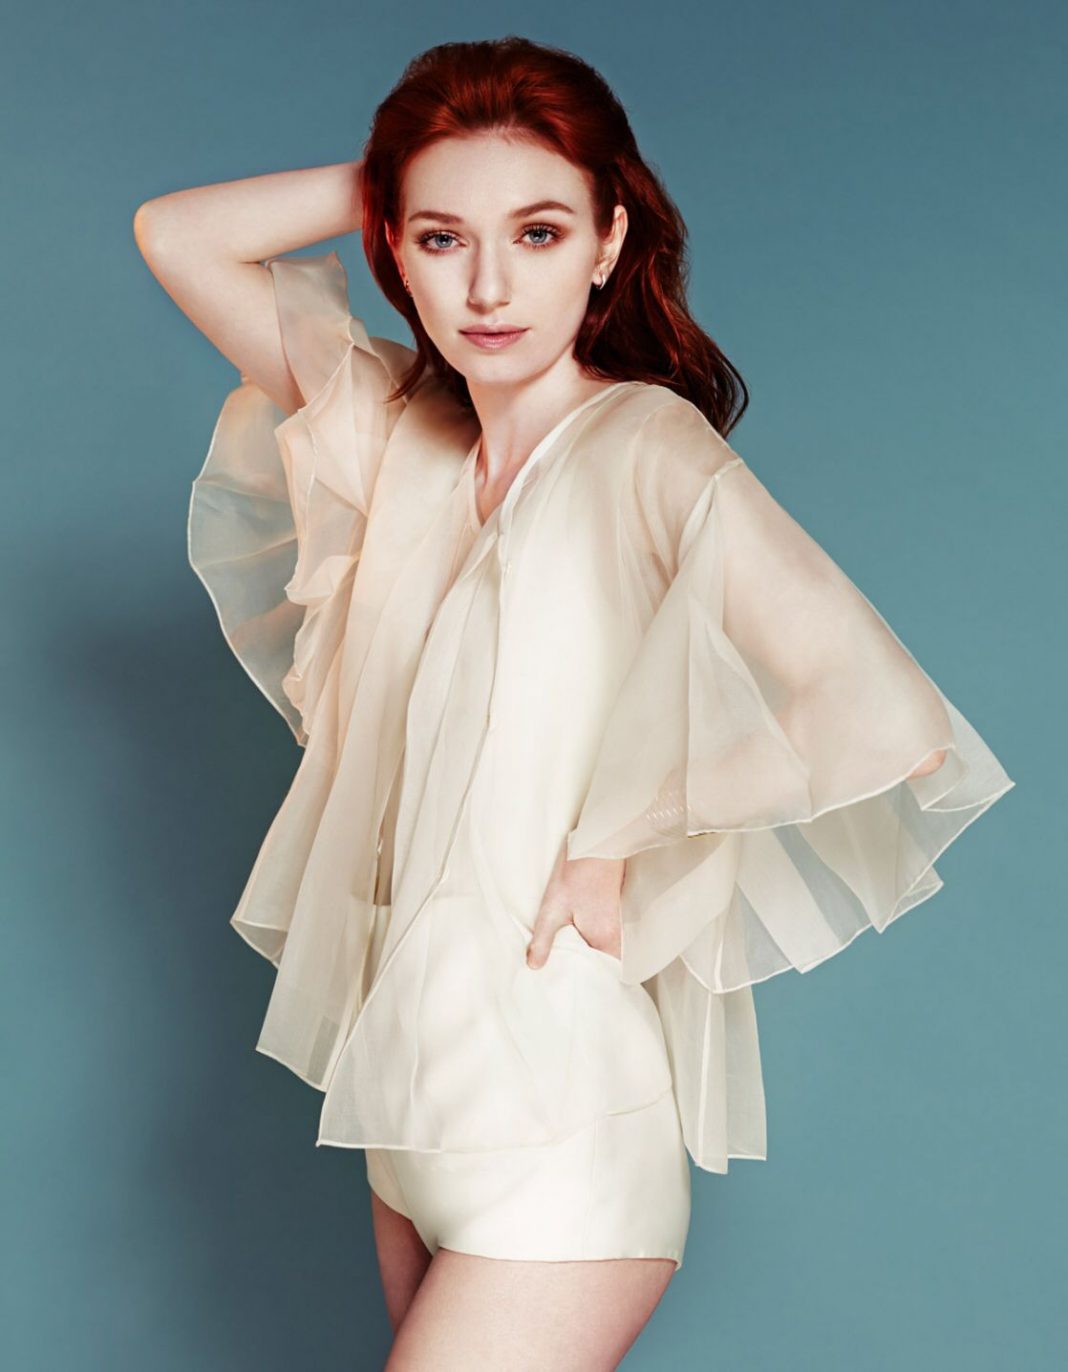 49 Eleanor Tomlinson Nude Pictures That Are Appealingly Attractive 8